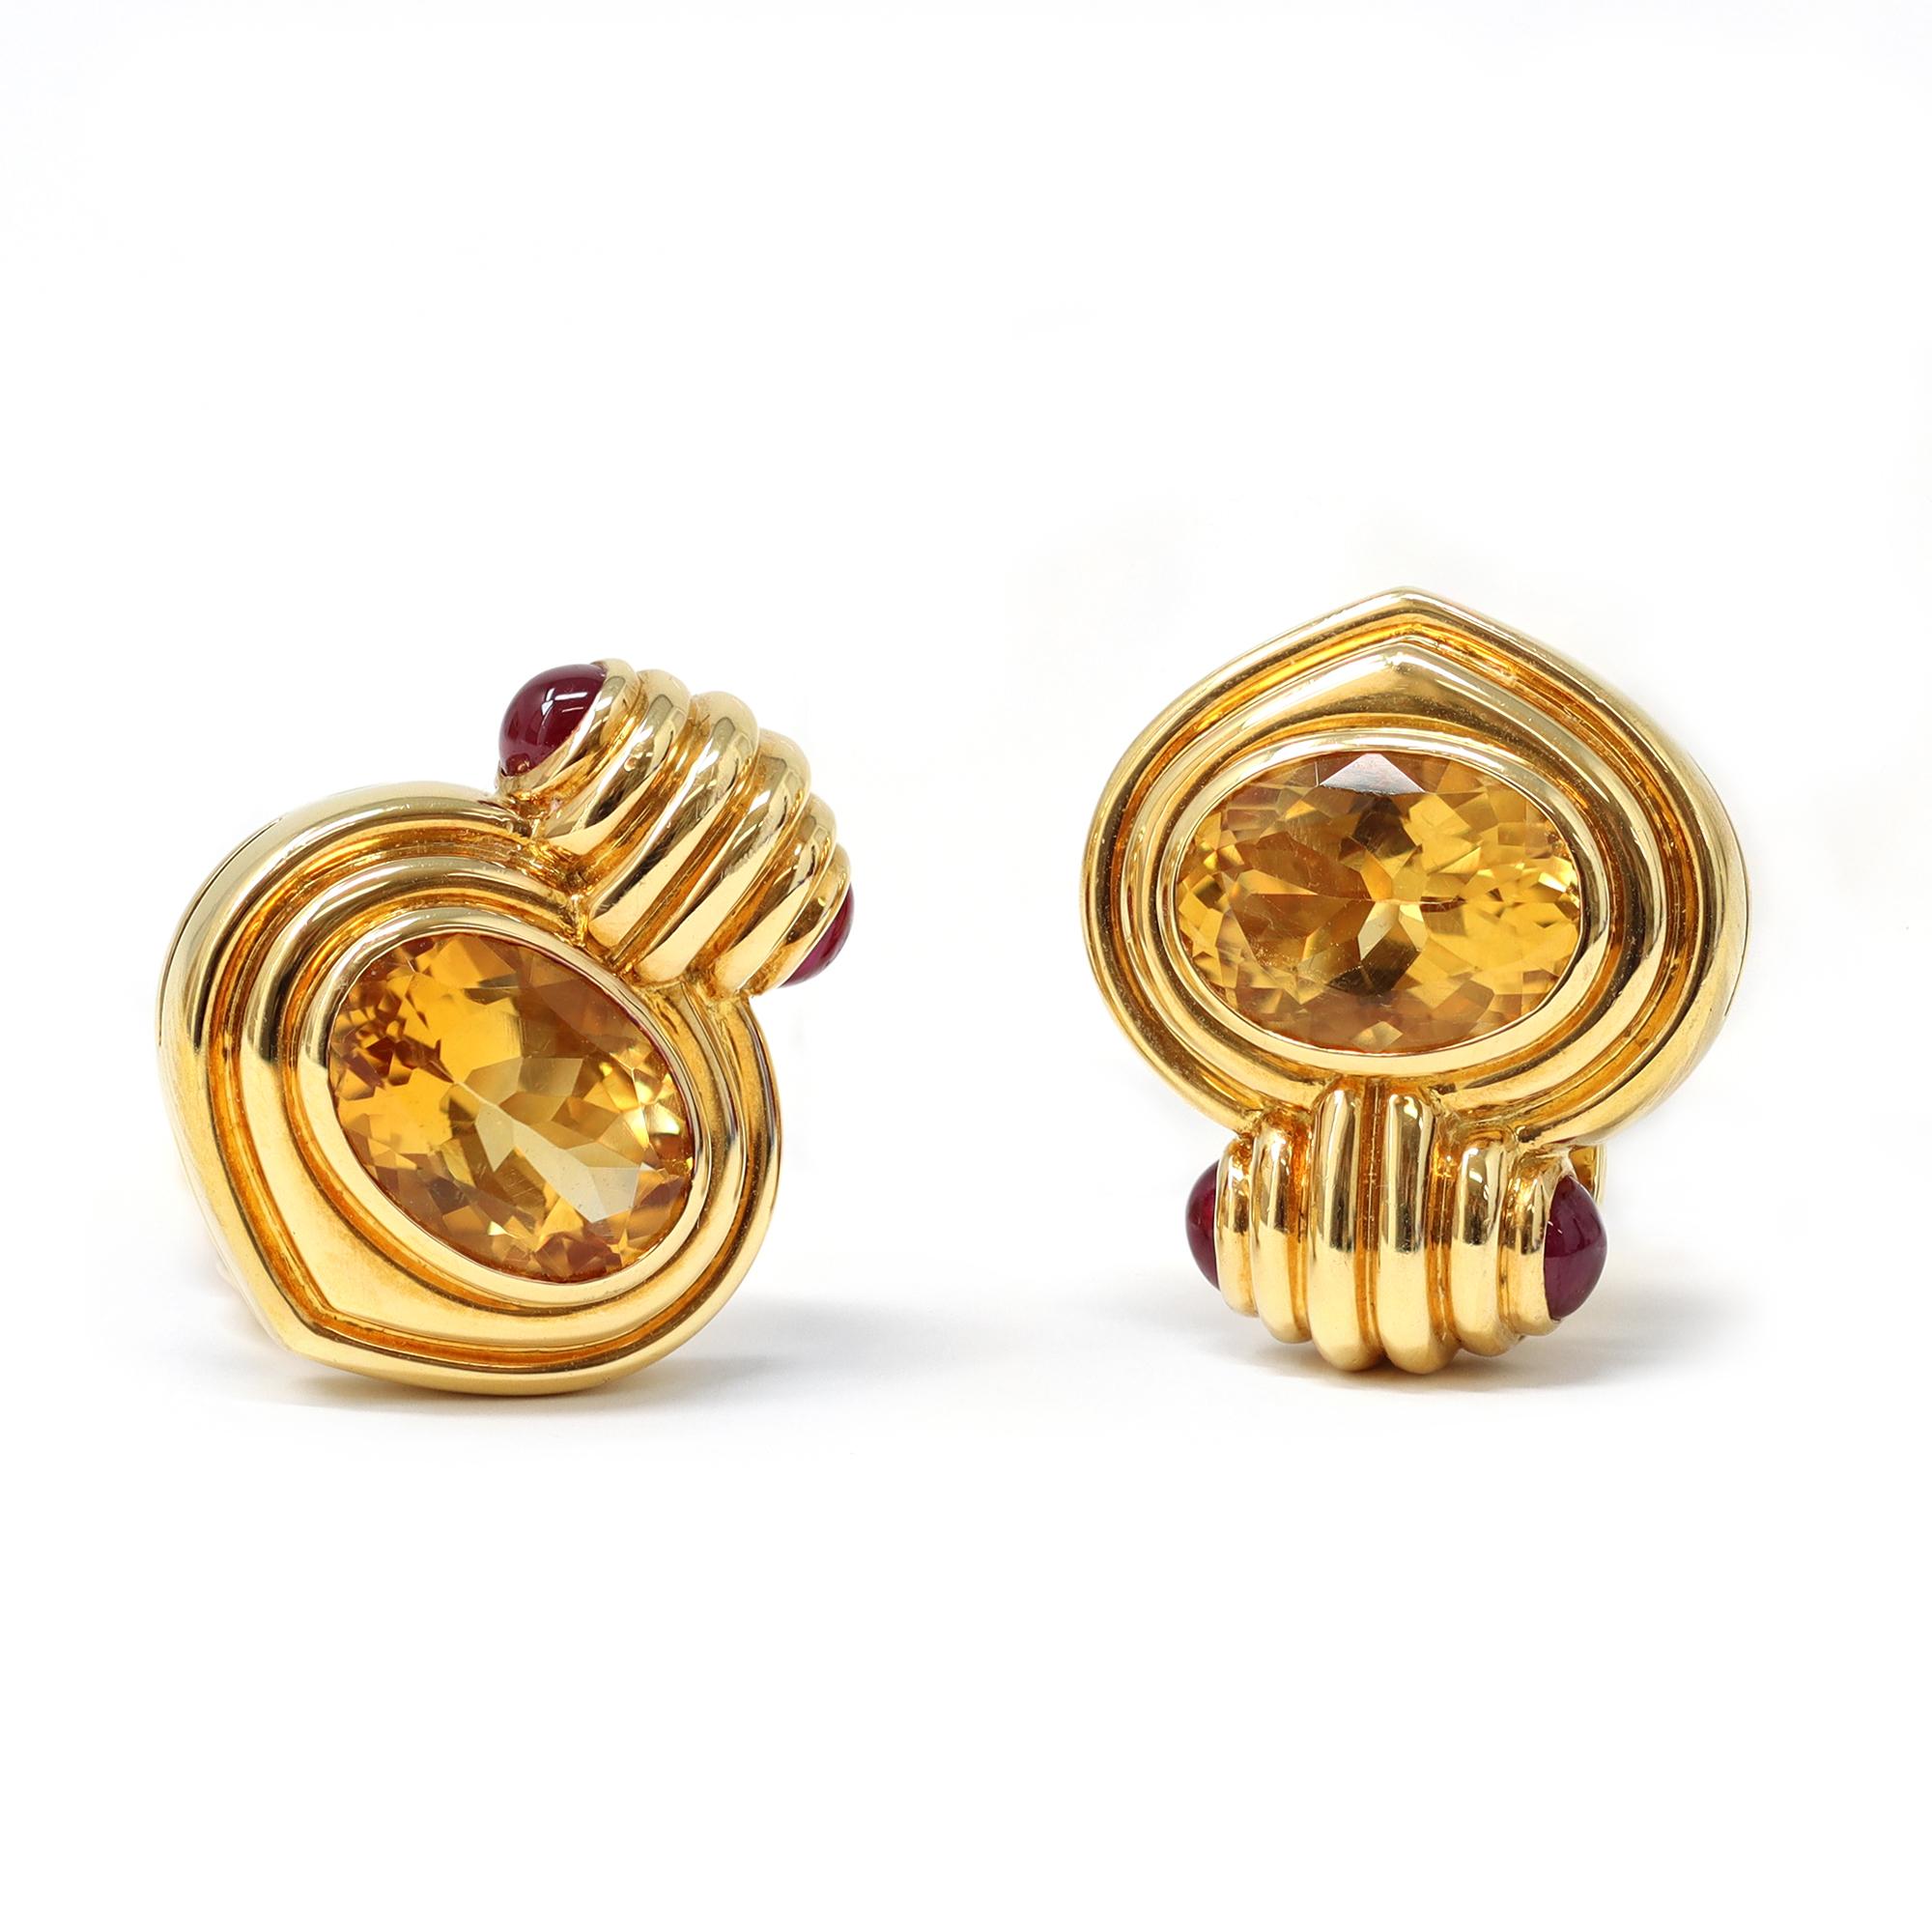 Signed by the iconic Italian house of Jewelry Bvlgari, these lovely clip-on earrings feature perfectly match vivid citrine enhanced with cabochon rubies. The earrings are set in 18-karat yellow gold. They have perfect scale and can be worn on any